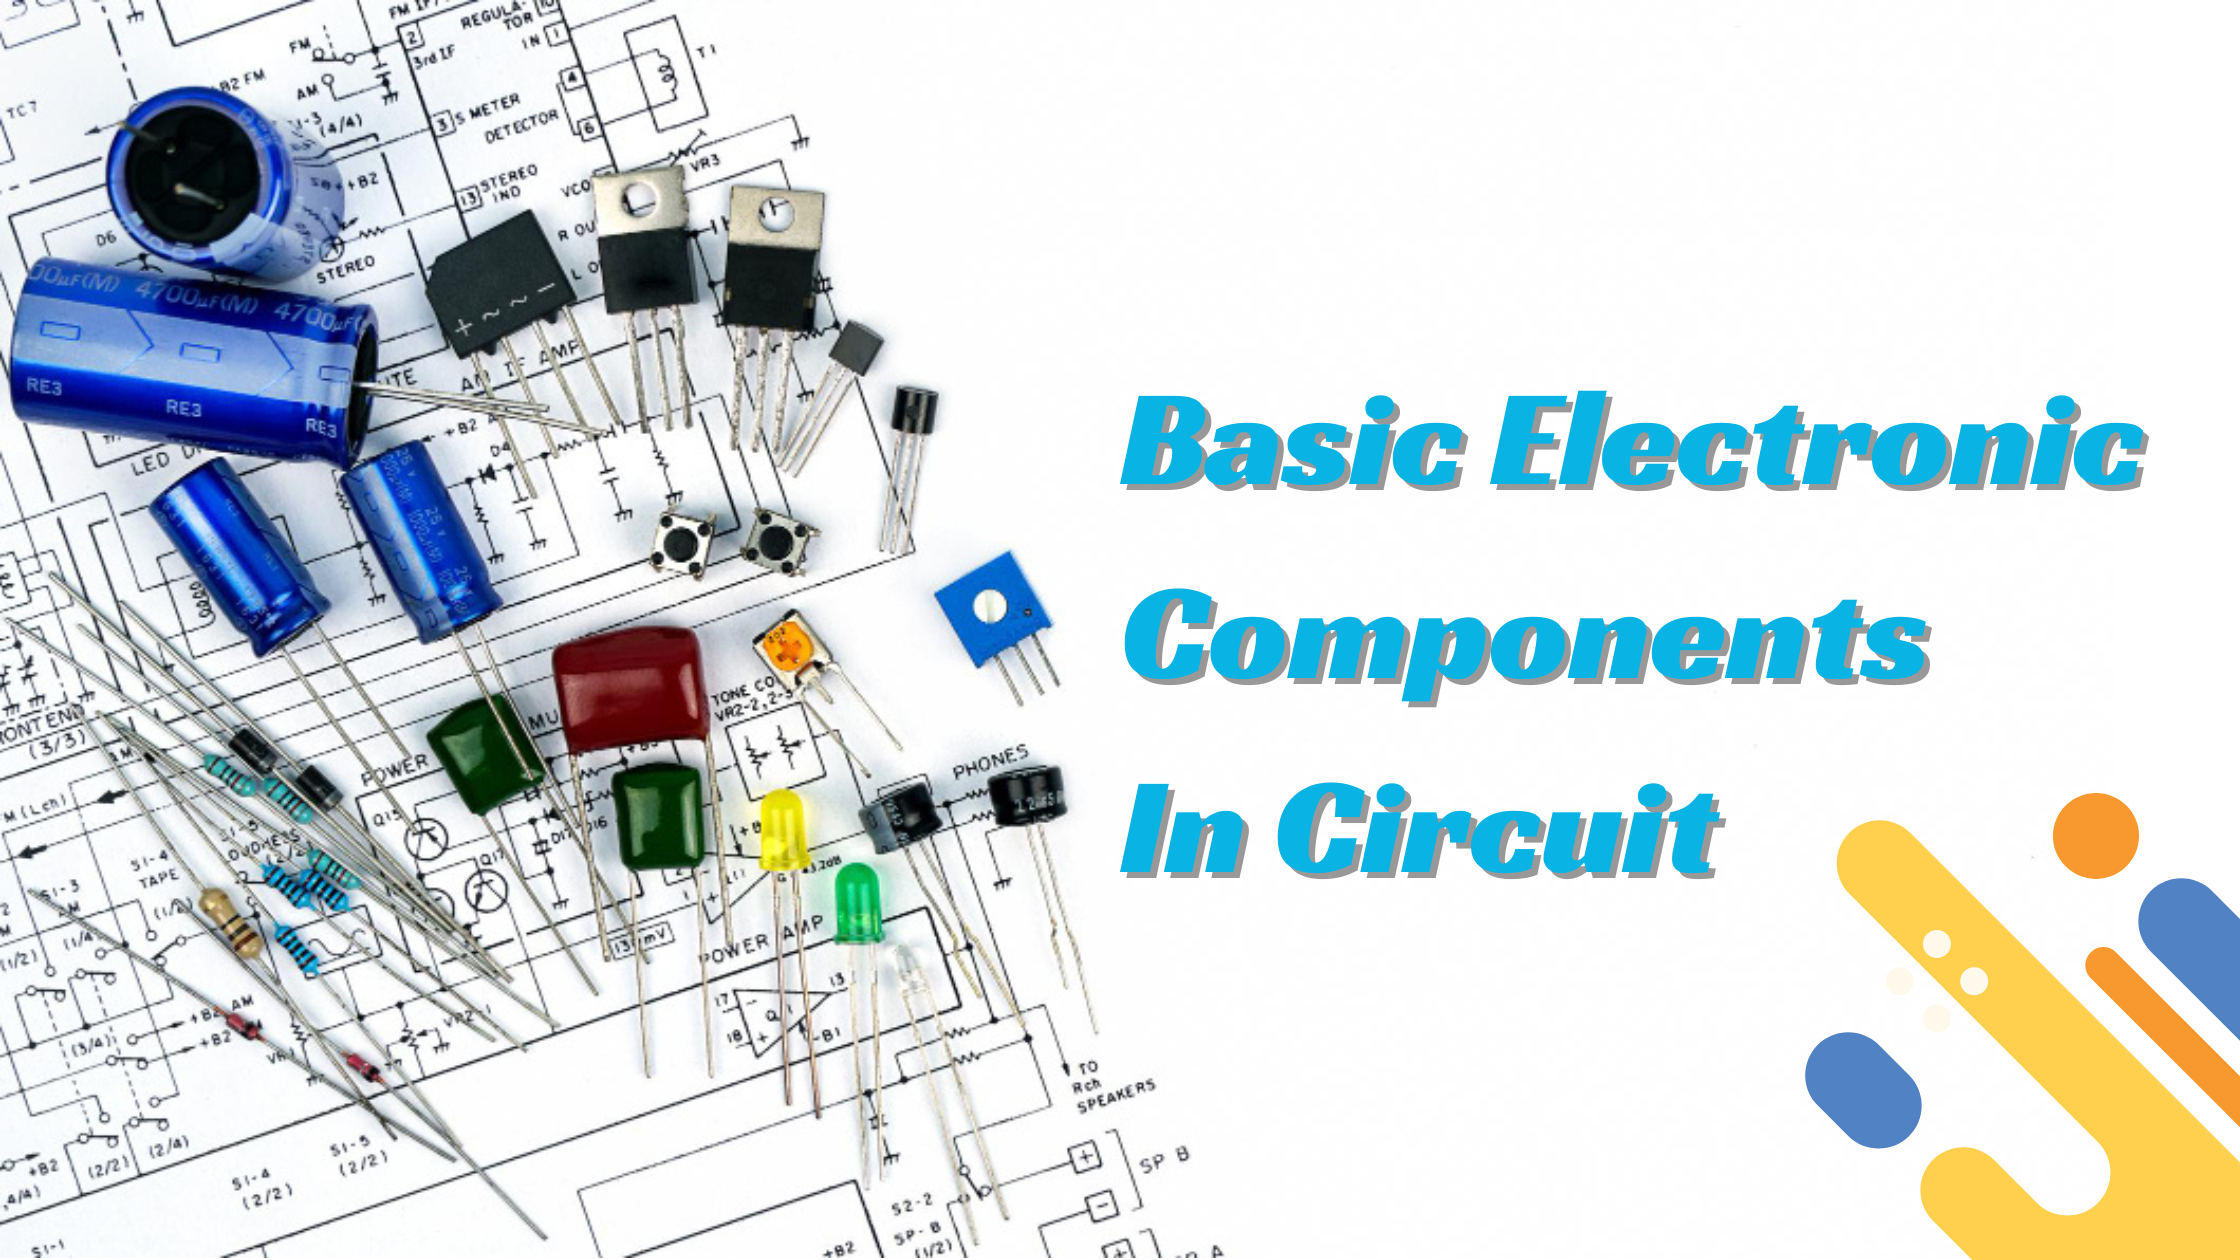 Basic Electronic Components in Circuit